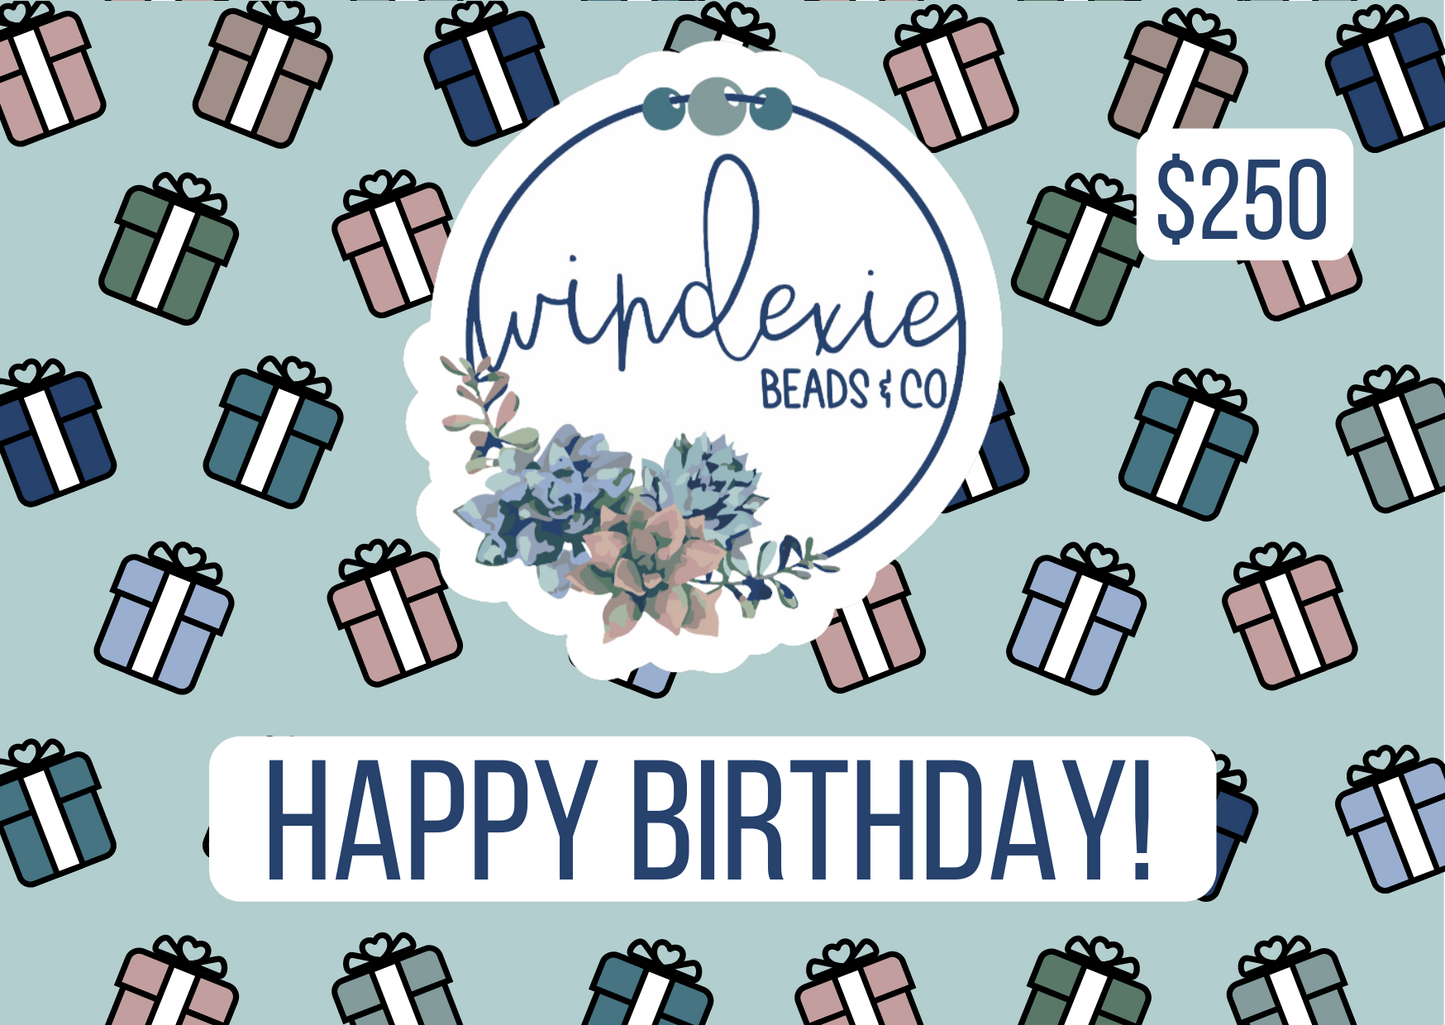 WinDexie Beads & Co gift card